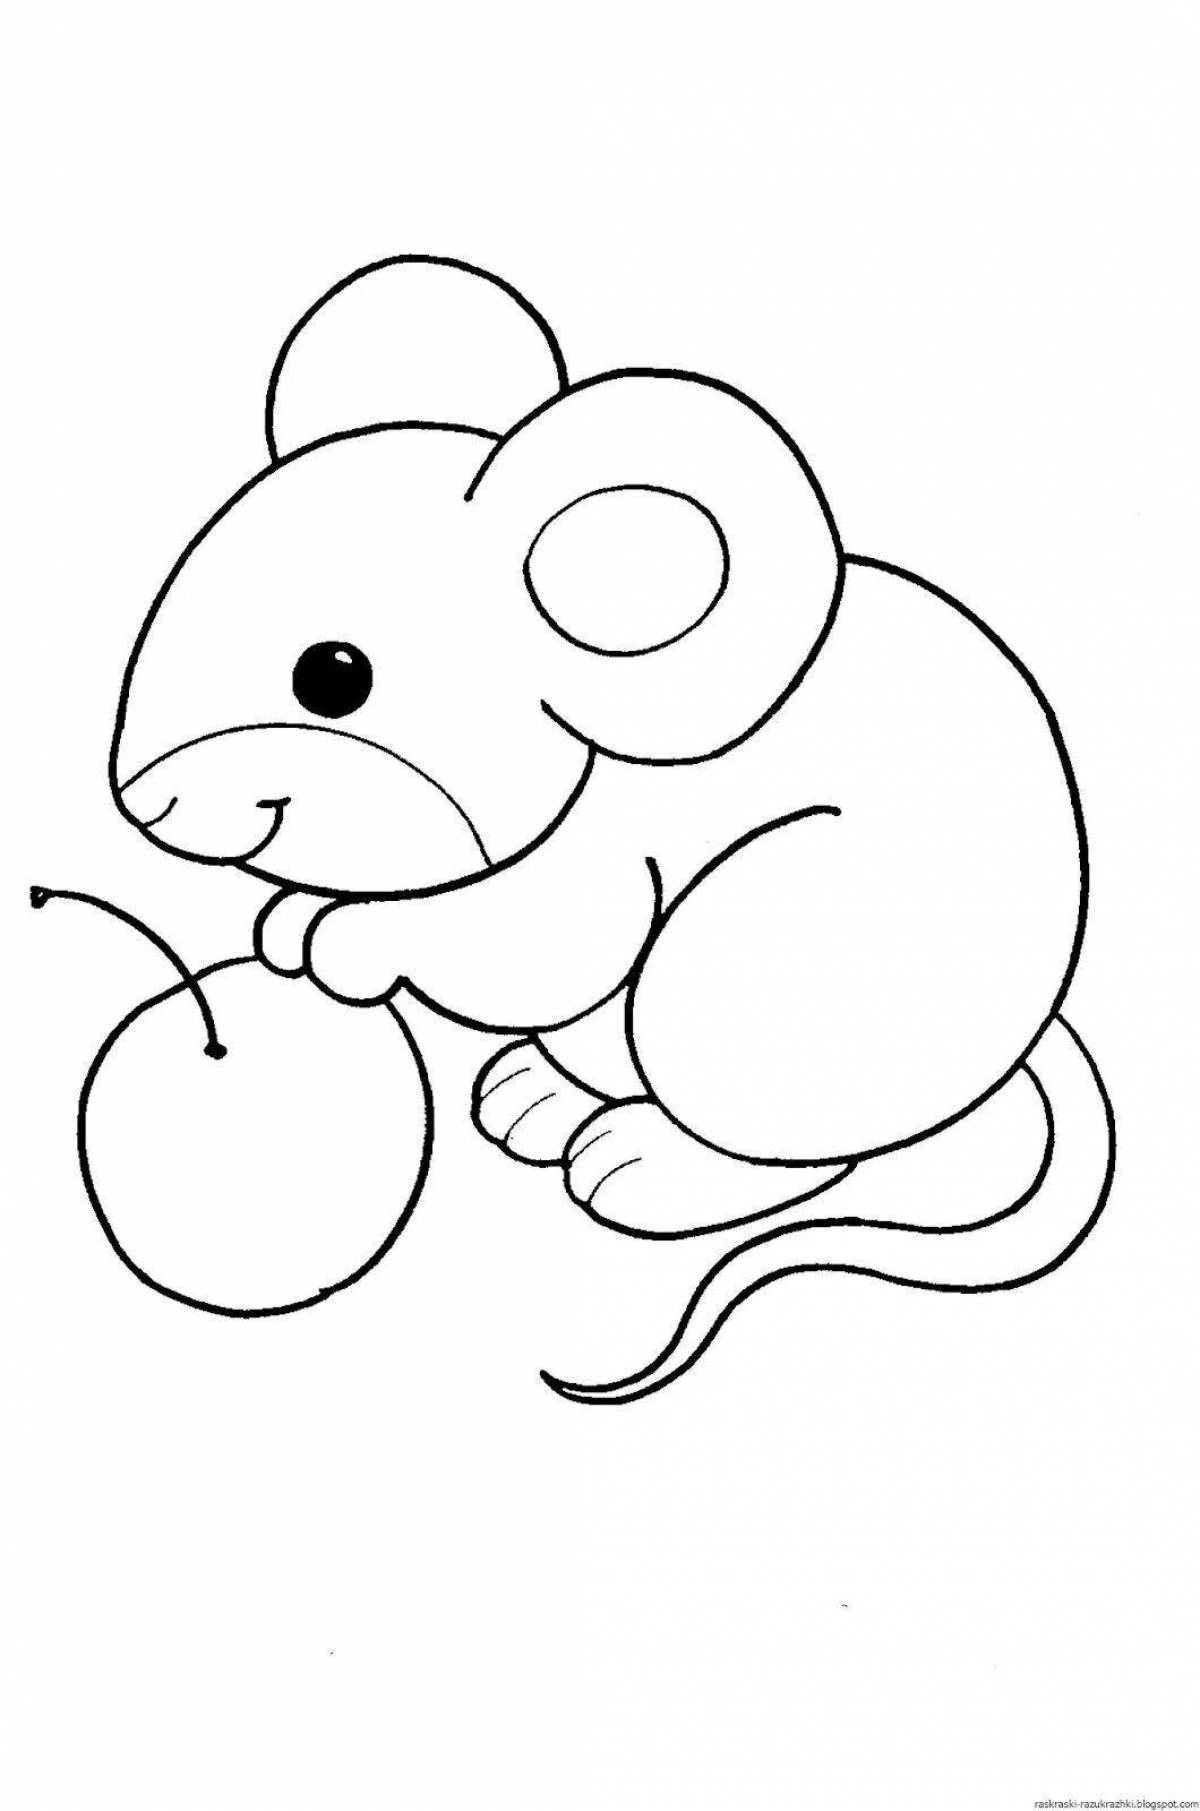 Bright mouse and bear coloring book